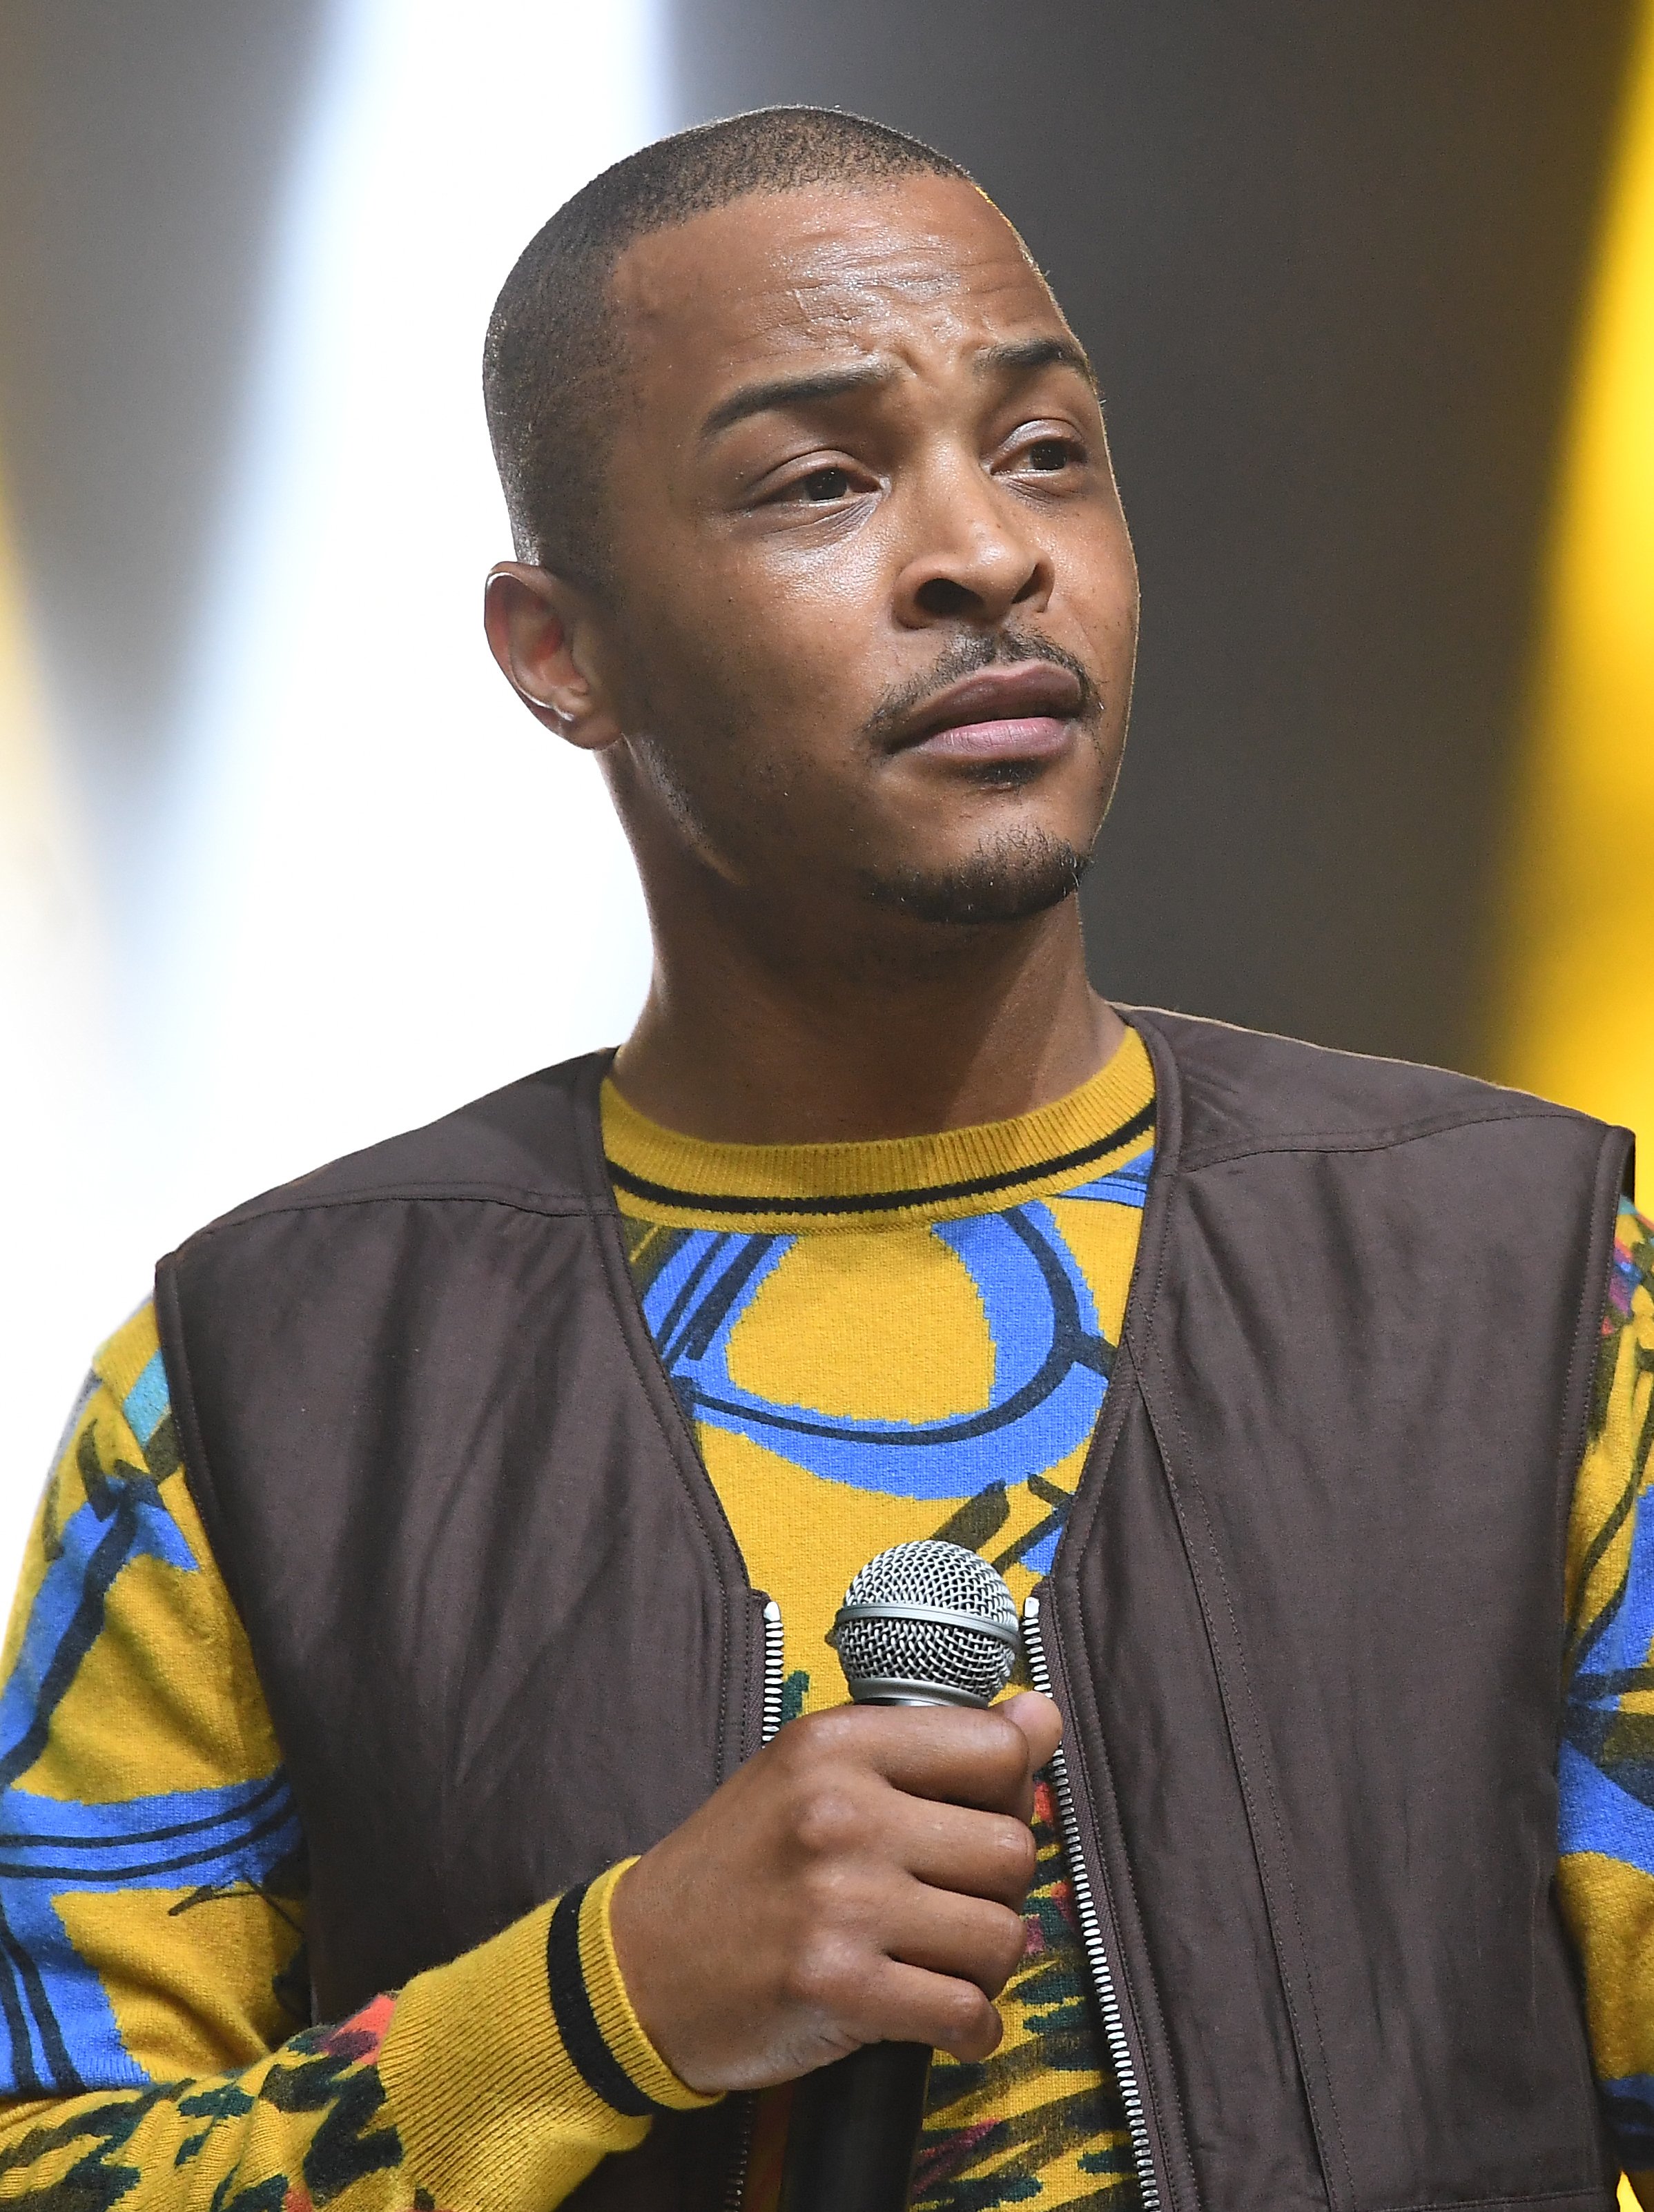 T.I. during a performance in Atlanta in July 2018. | Photo: Getty Images